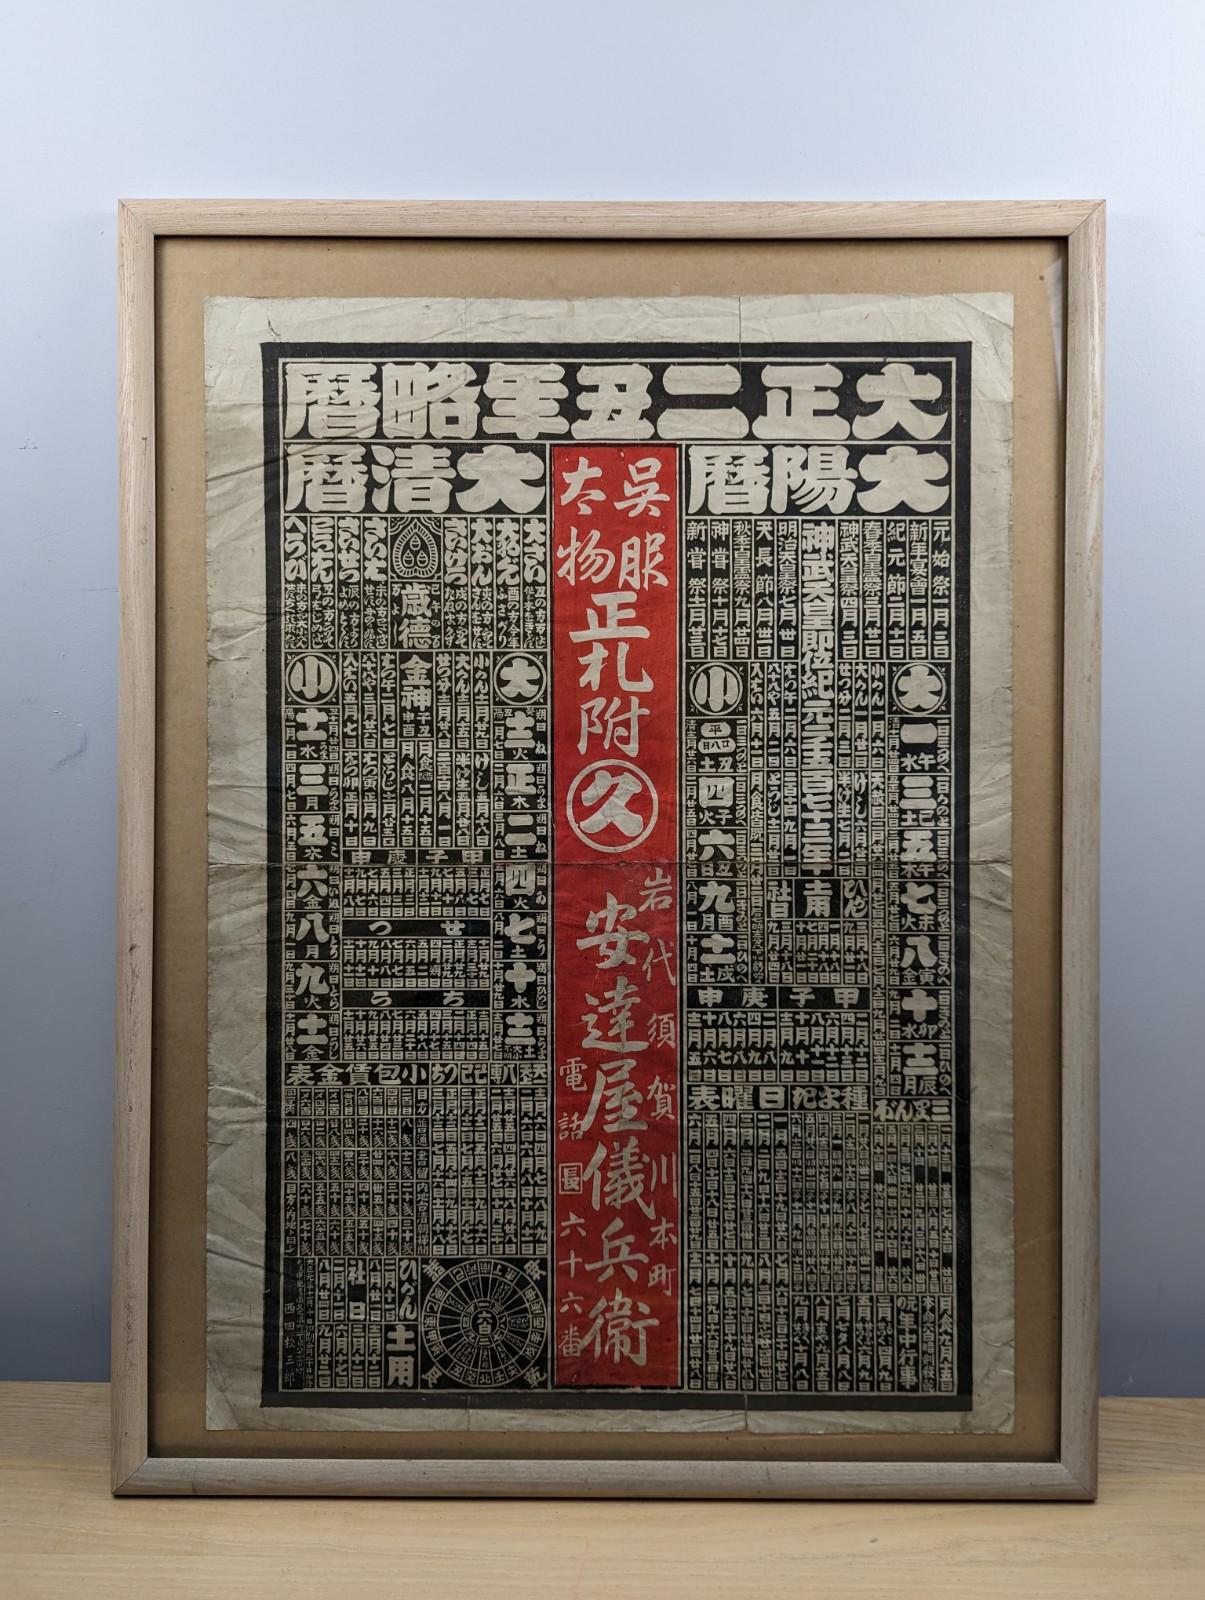 A Japanese block print advertising calendar (1912) from a Kimono store.

The item is supplied without a frame.